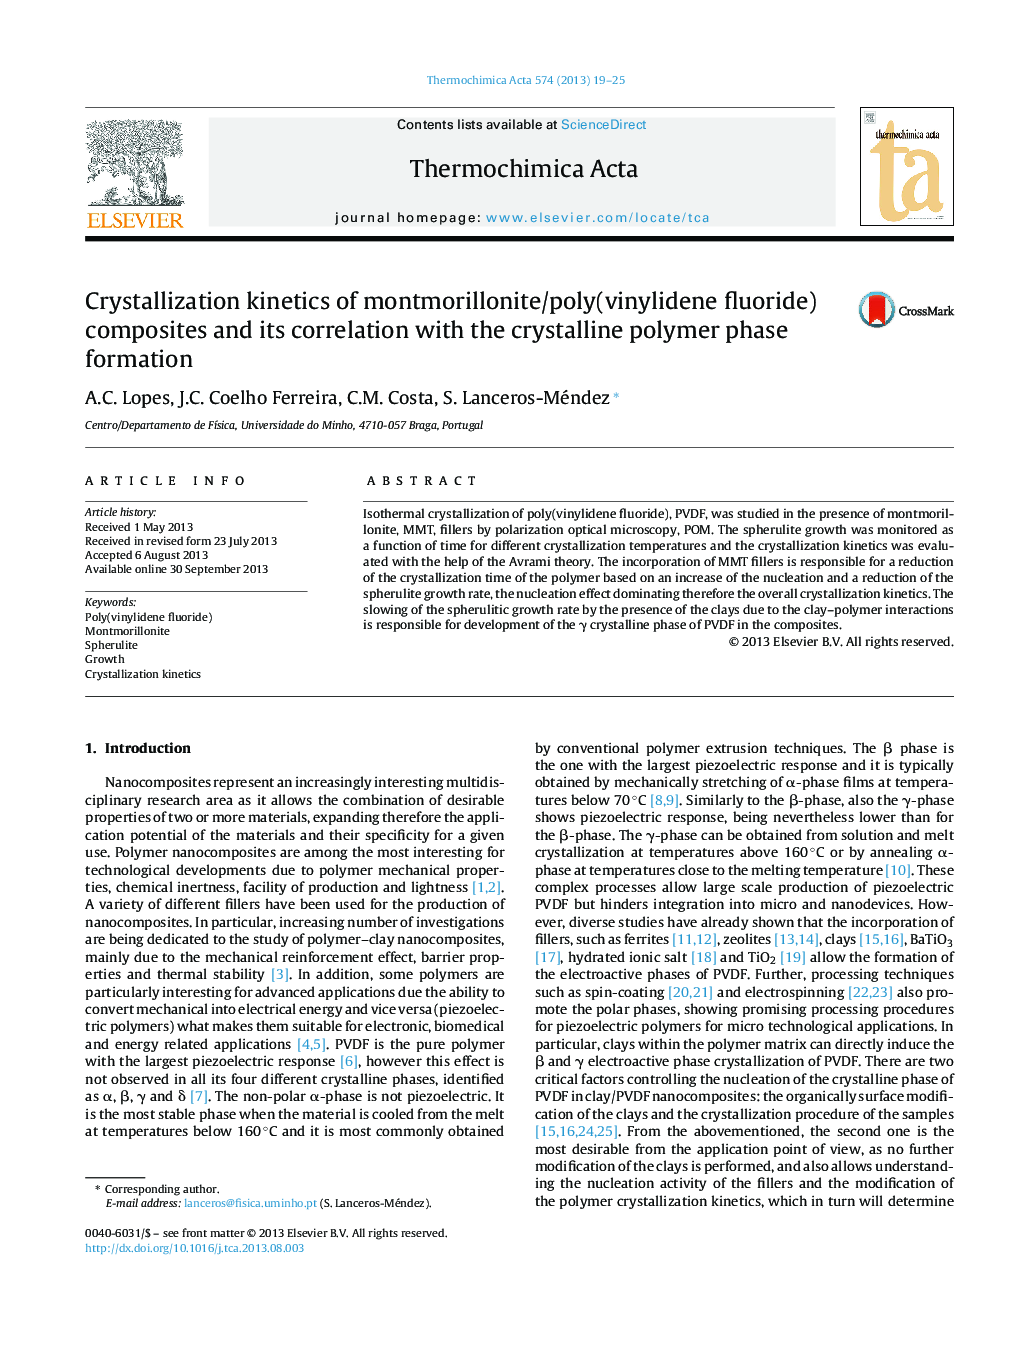 Crystallization kinetics of montmorillonite/poly(vinylidene fluoride) composites and its correlation with the crystalline polymer phase formation